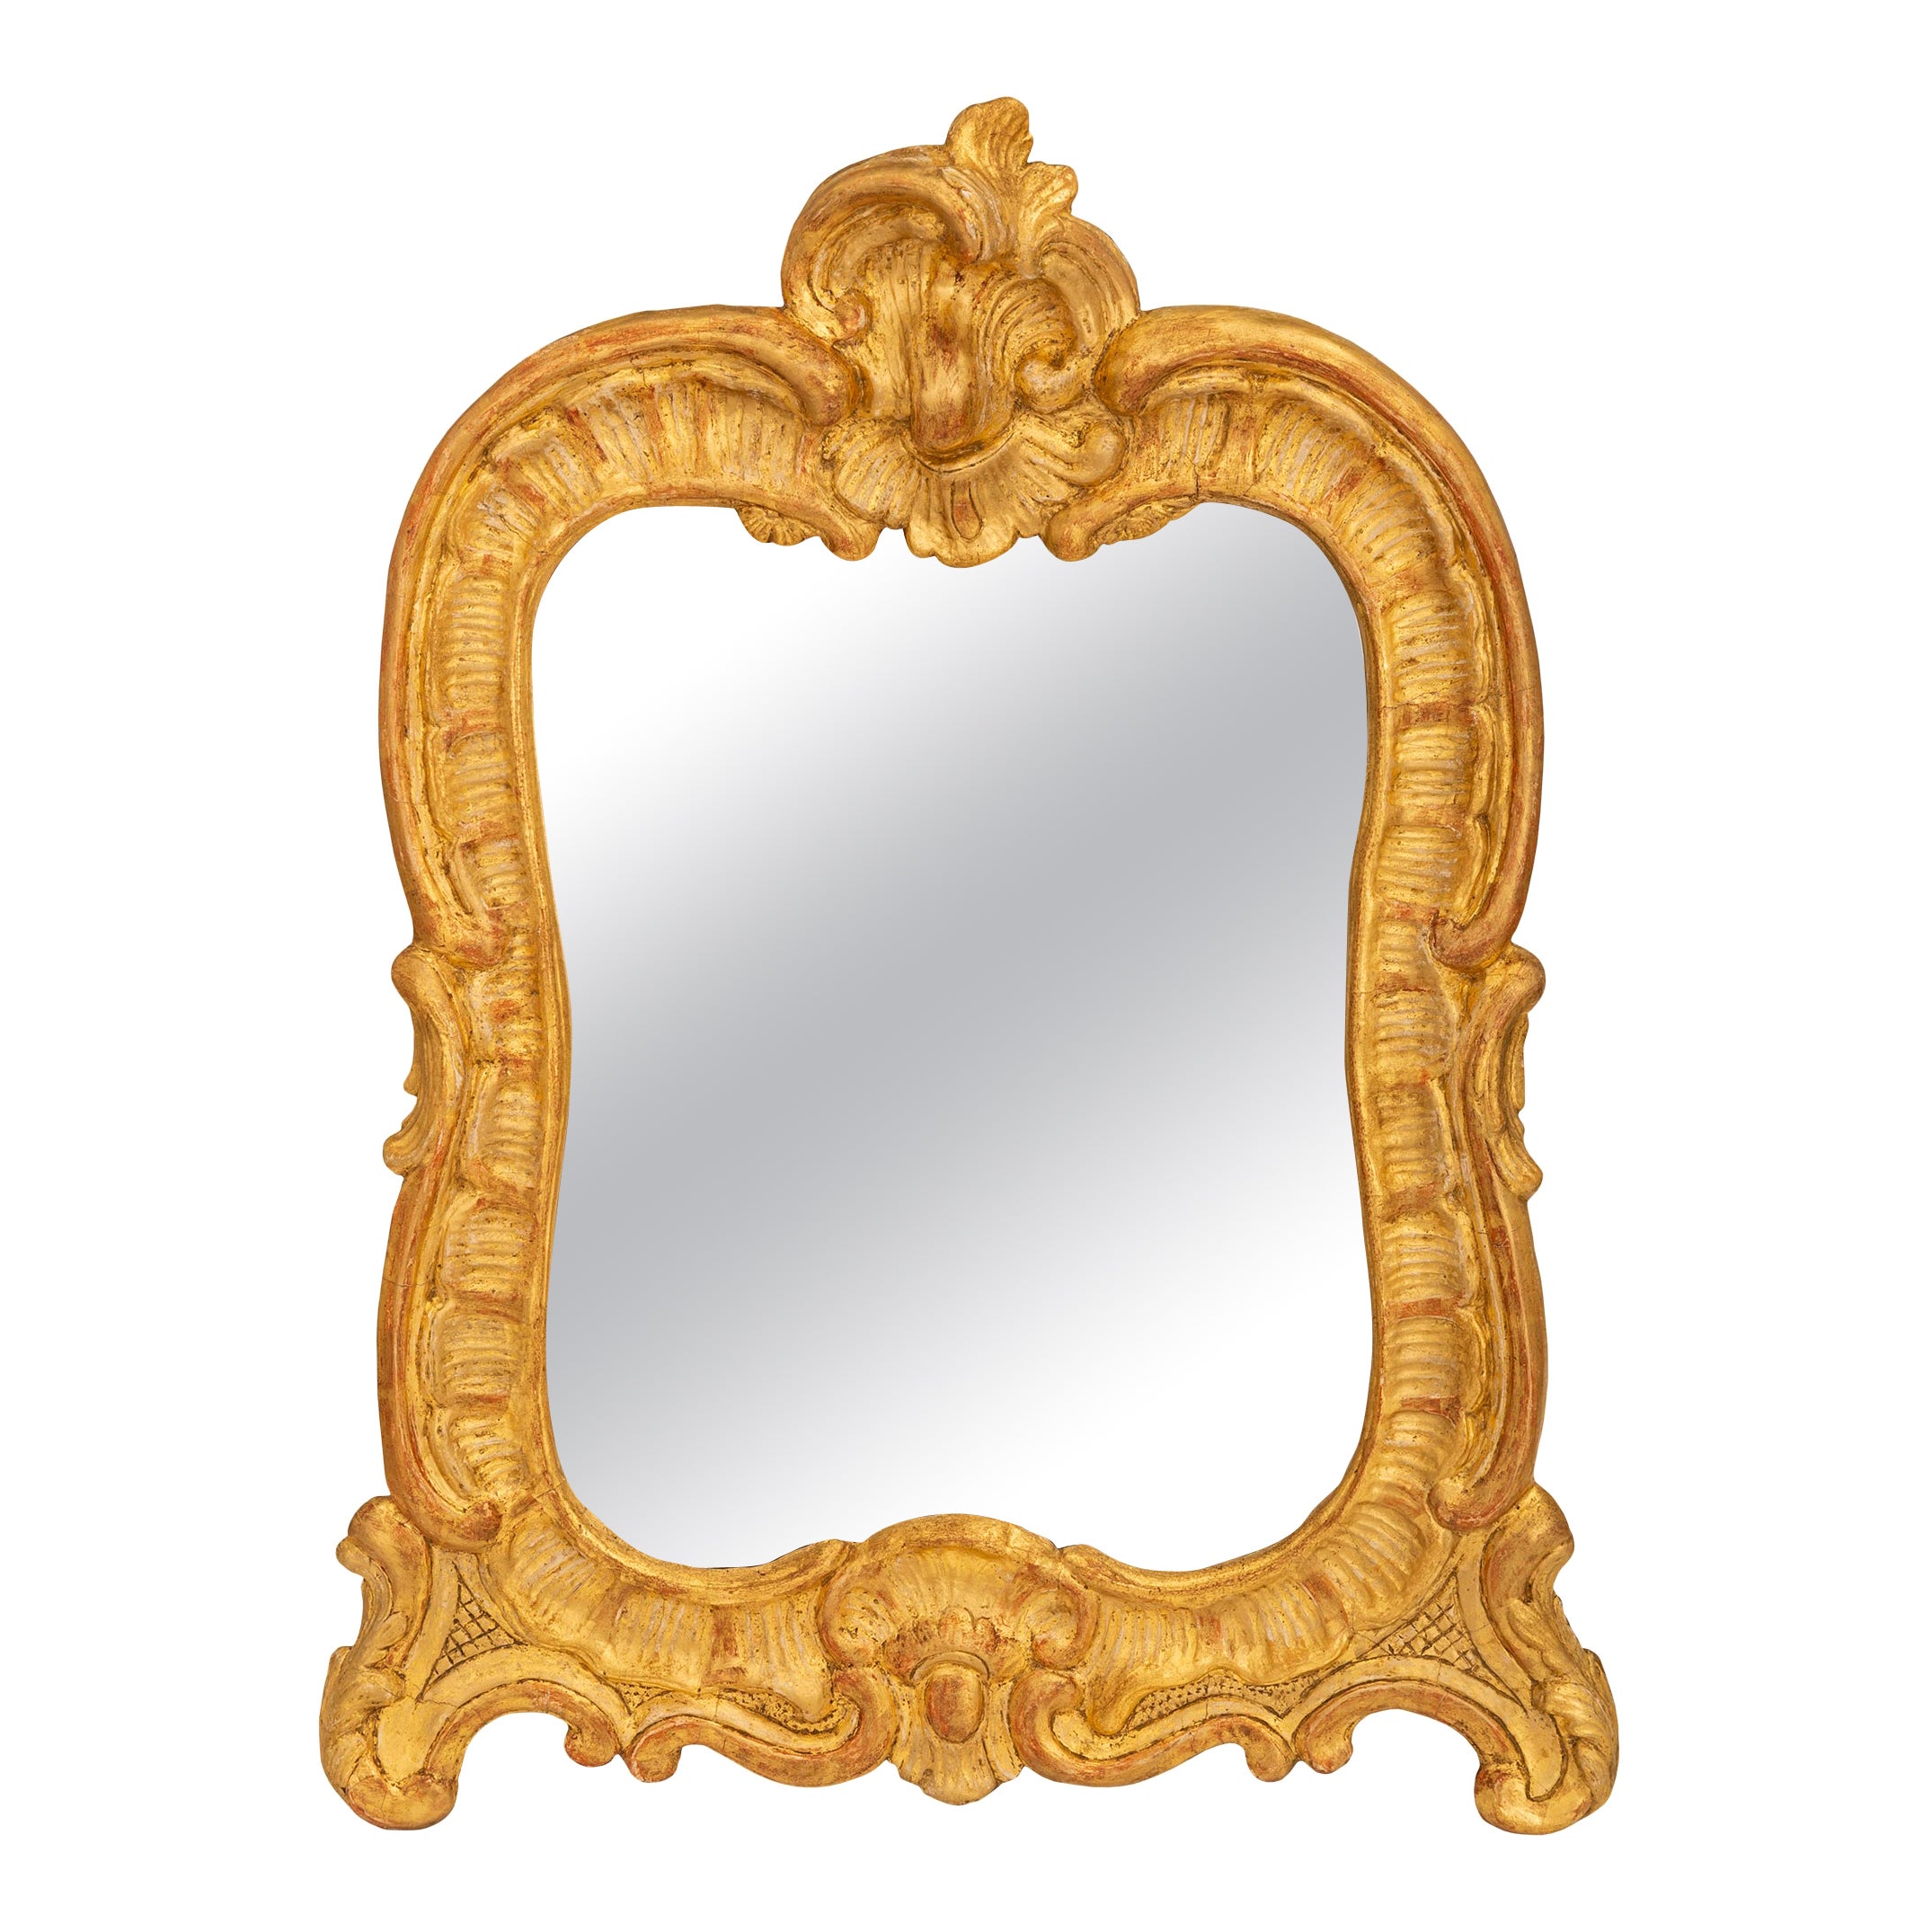 French 18th Century Louis XV Period Giltwood Vanity Mirror For Sale